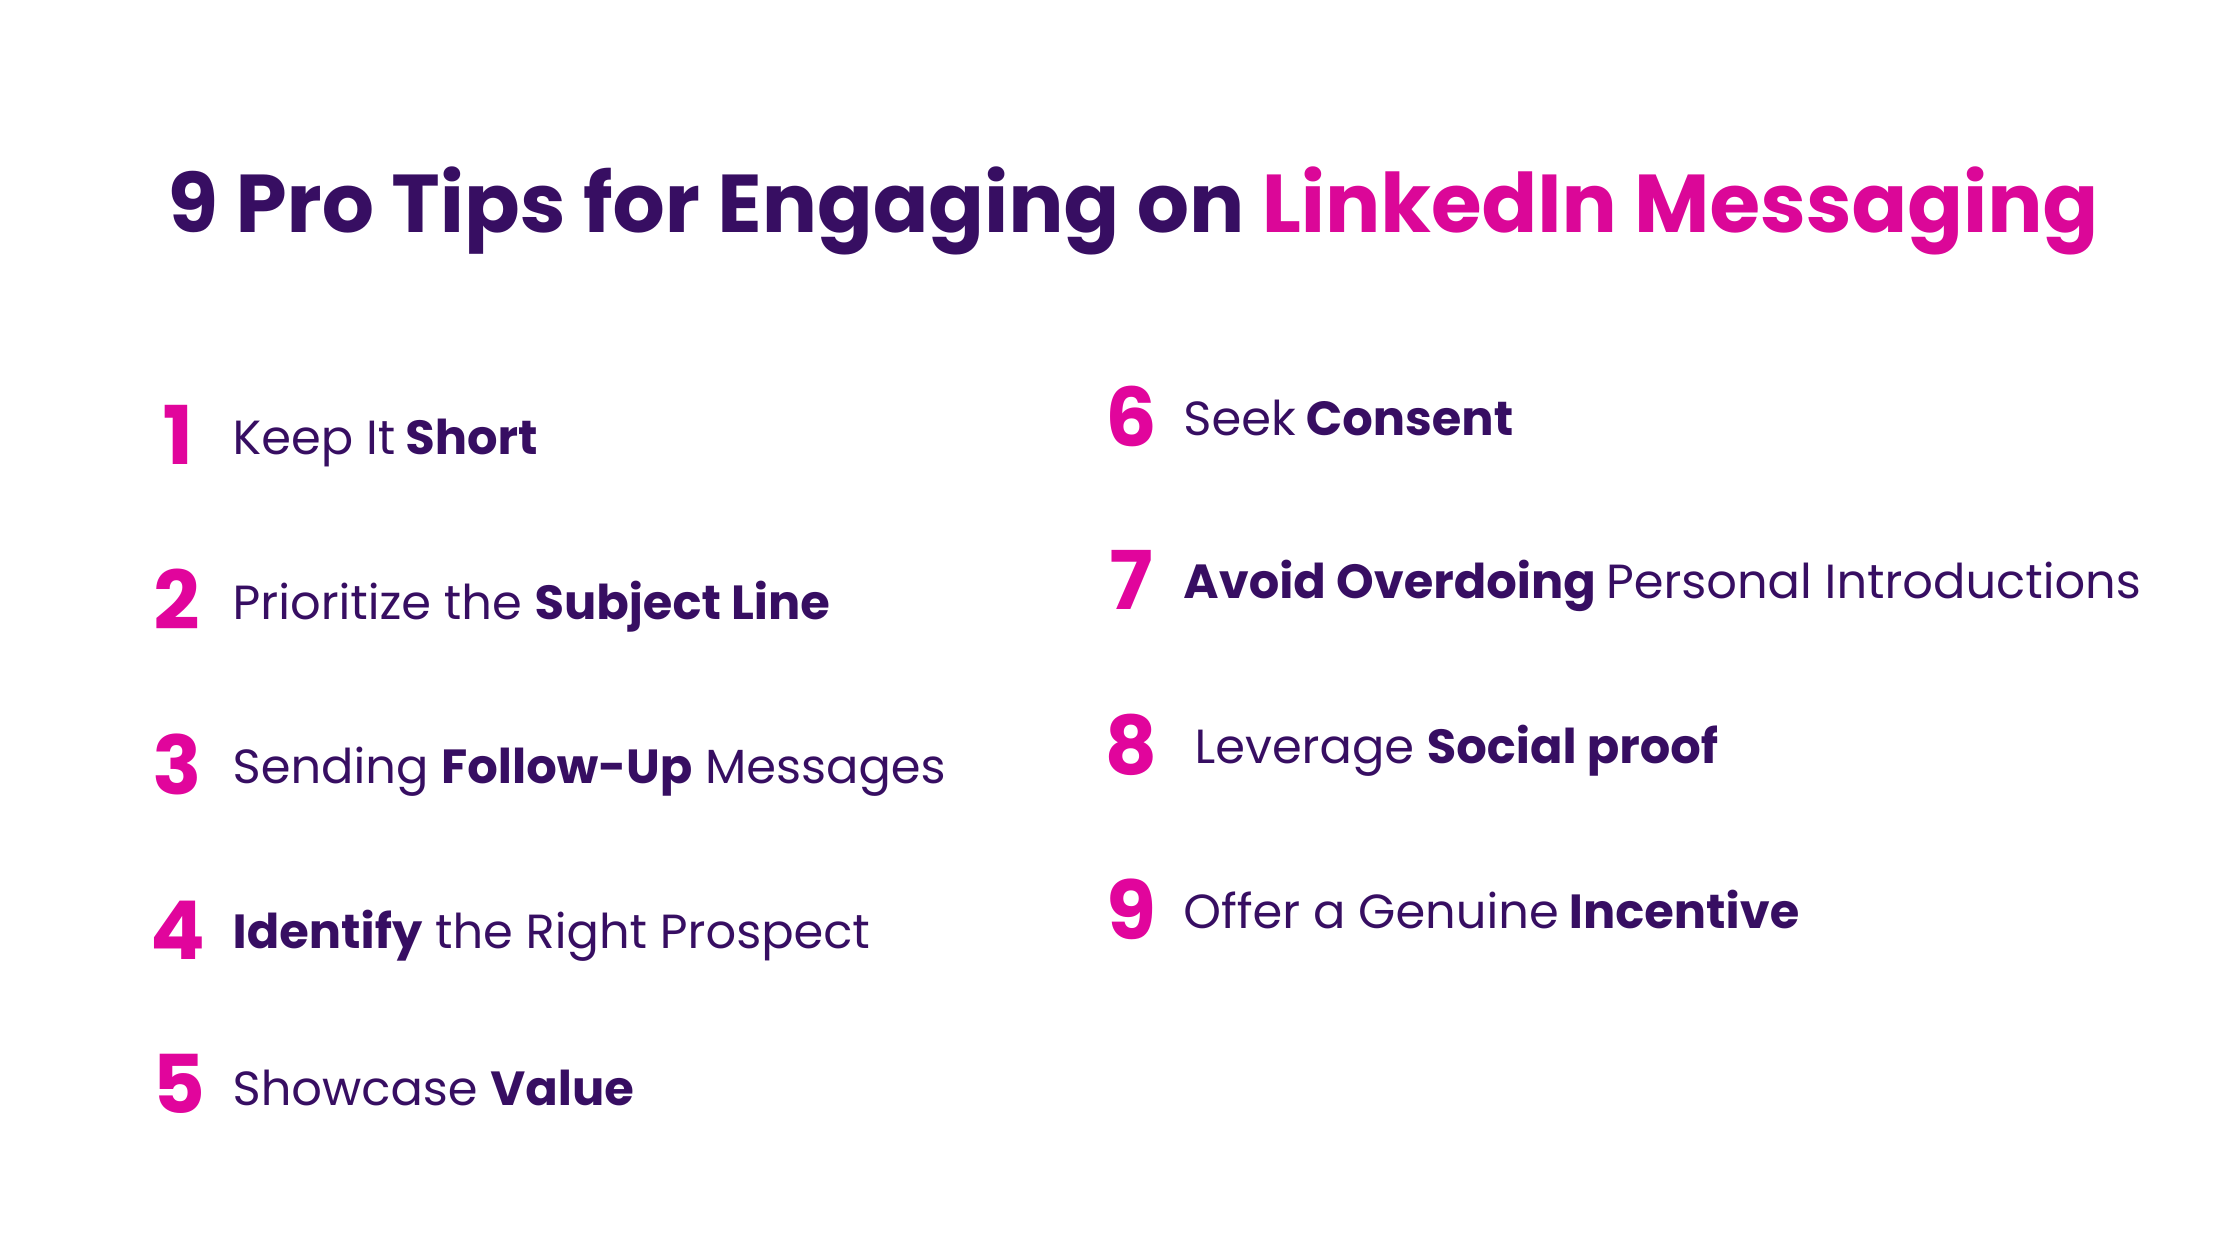 9 Pro Tips for Engaging on LinkedIn Messaging